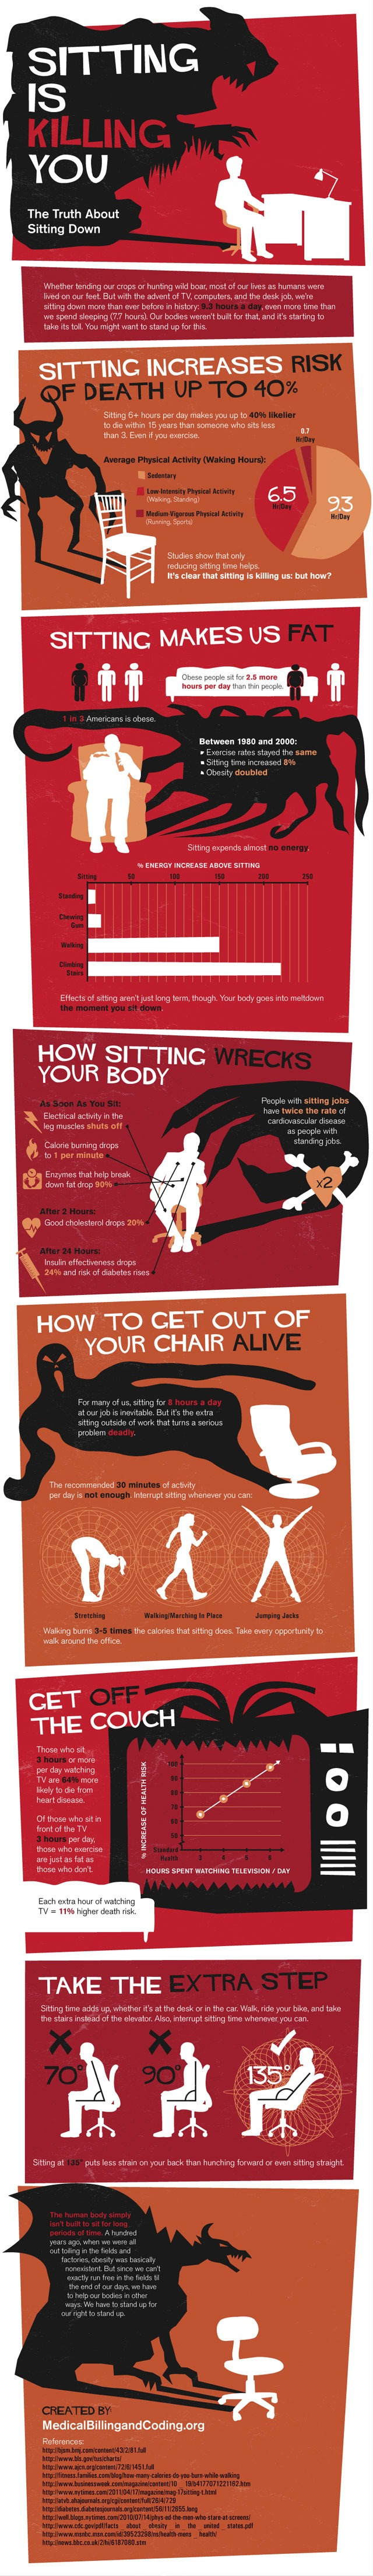 Sitting is Killing You Infographic